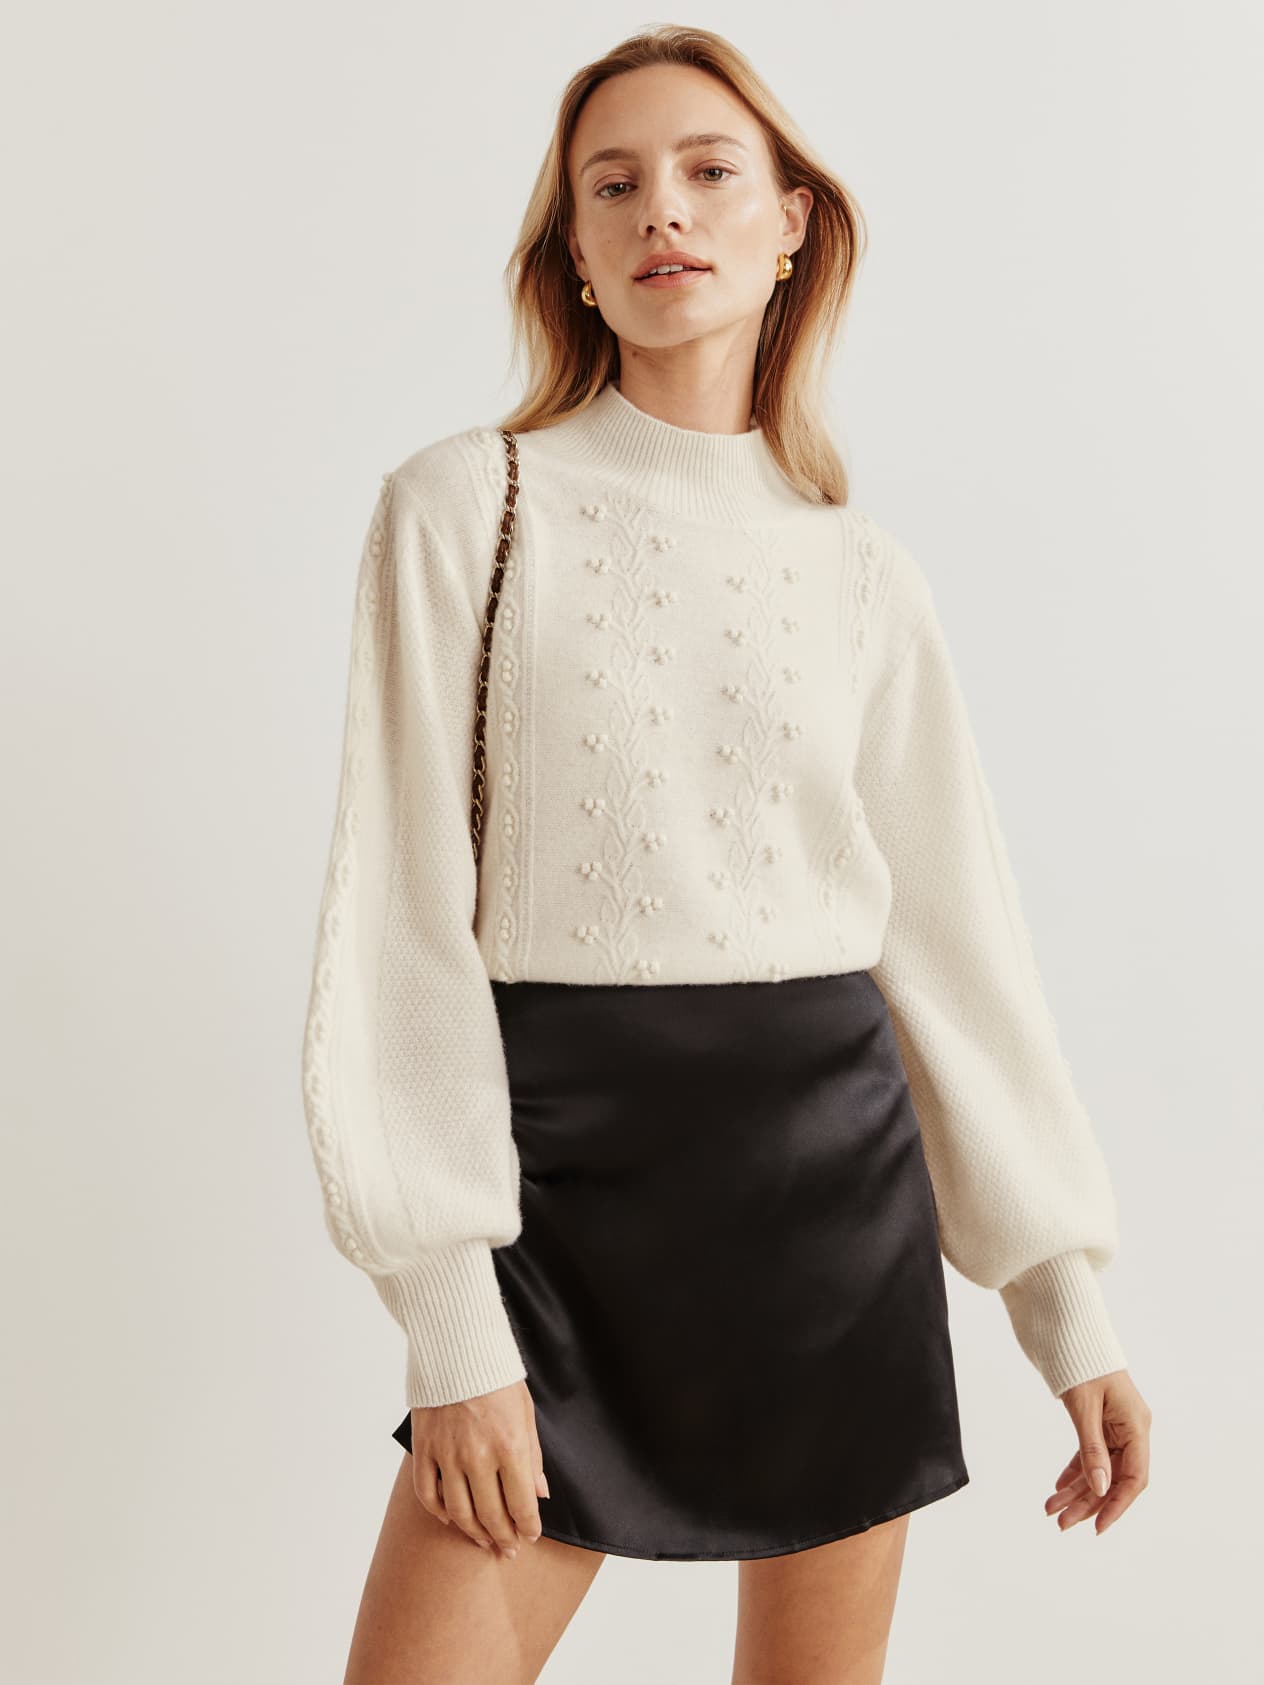 REFORMATION + NET SUSTAIN + Sinclair Embroidered Wool Sweater